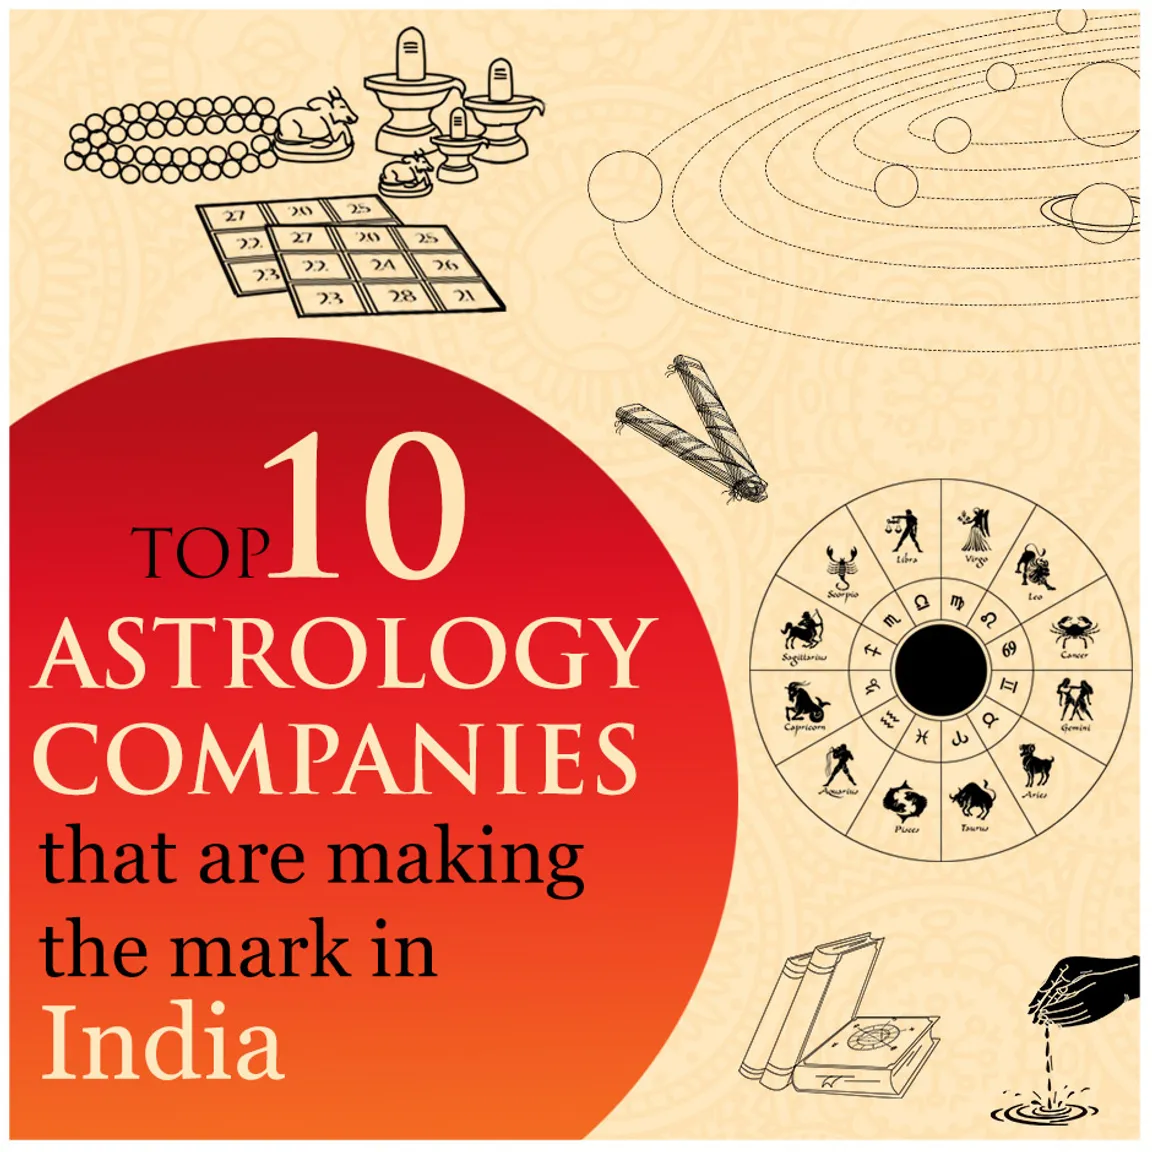 Top 10 Astrology companies - Making the mark in India 